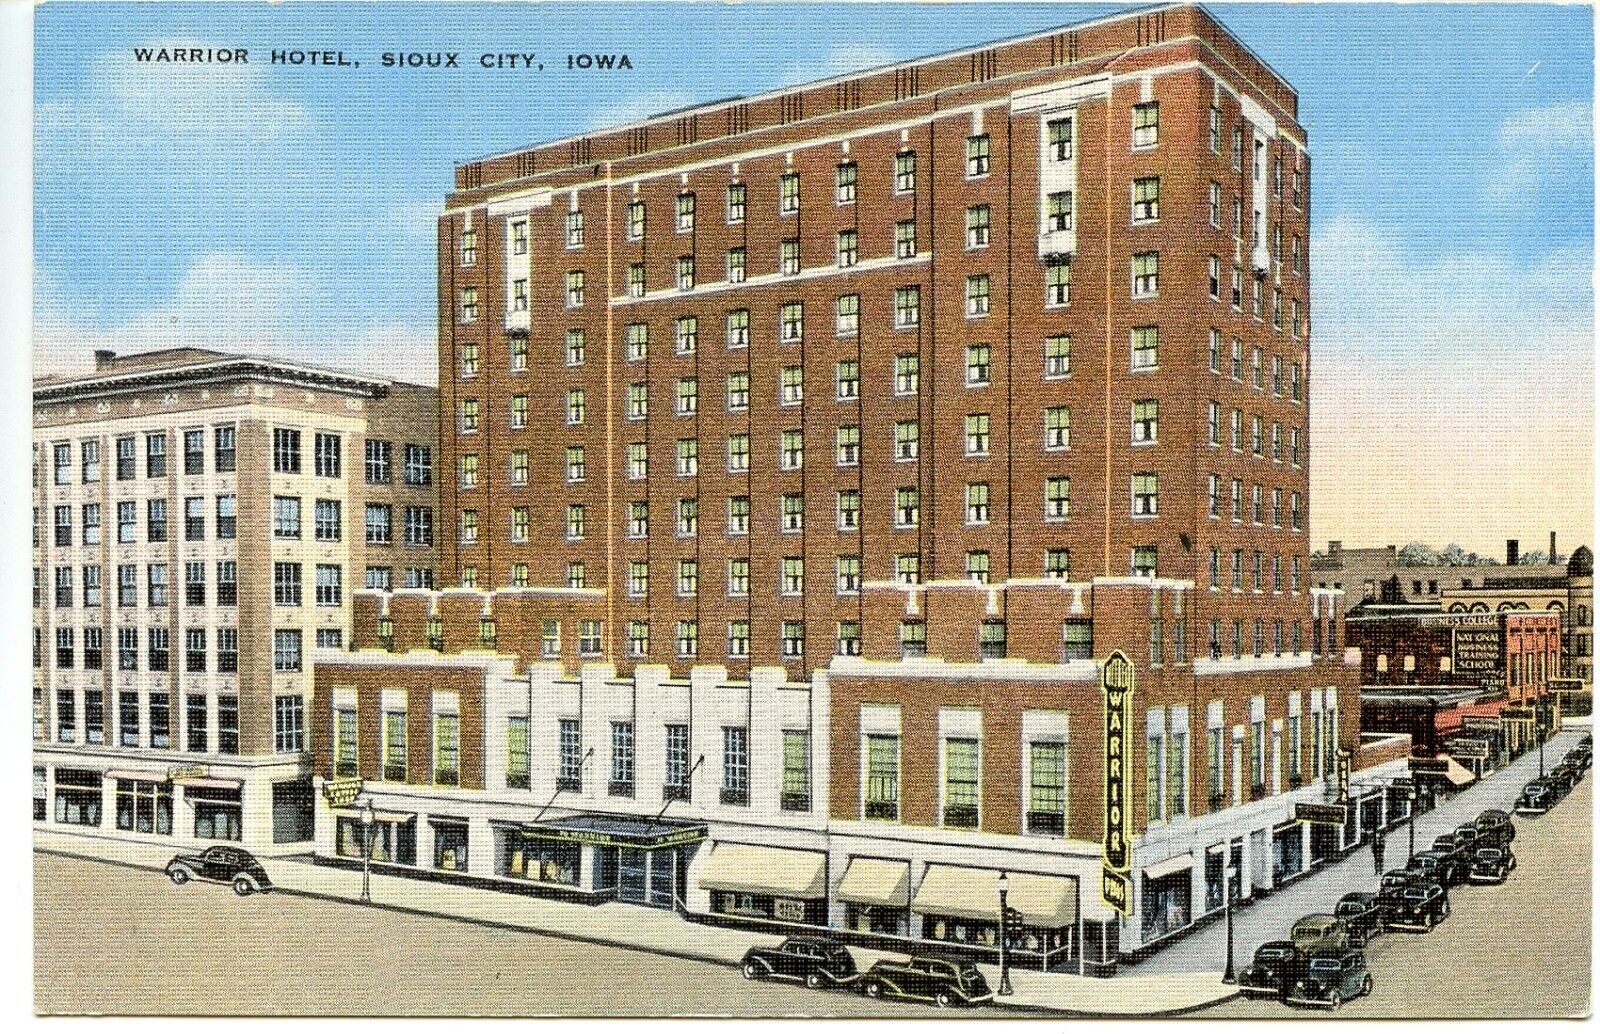 Sioux City Iowa IA Warrior Hotel Old Cars Vintage 1940s Linen Postcard Unposted